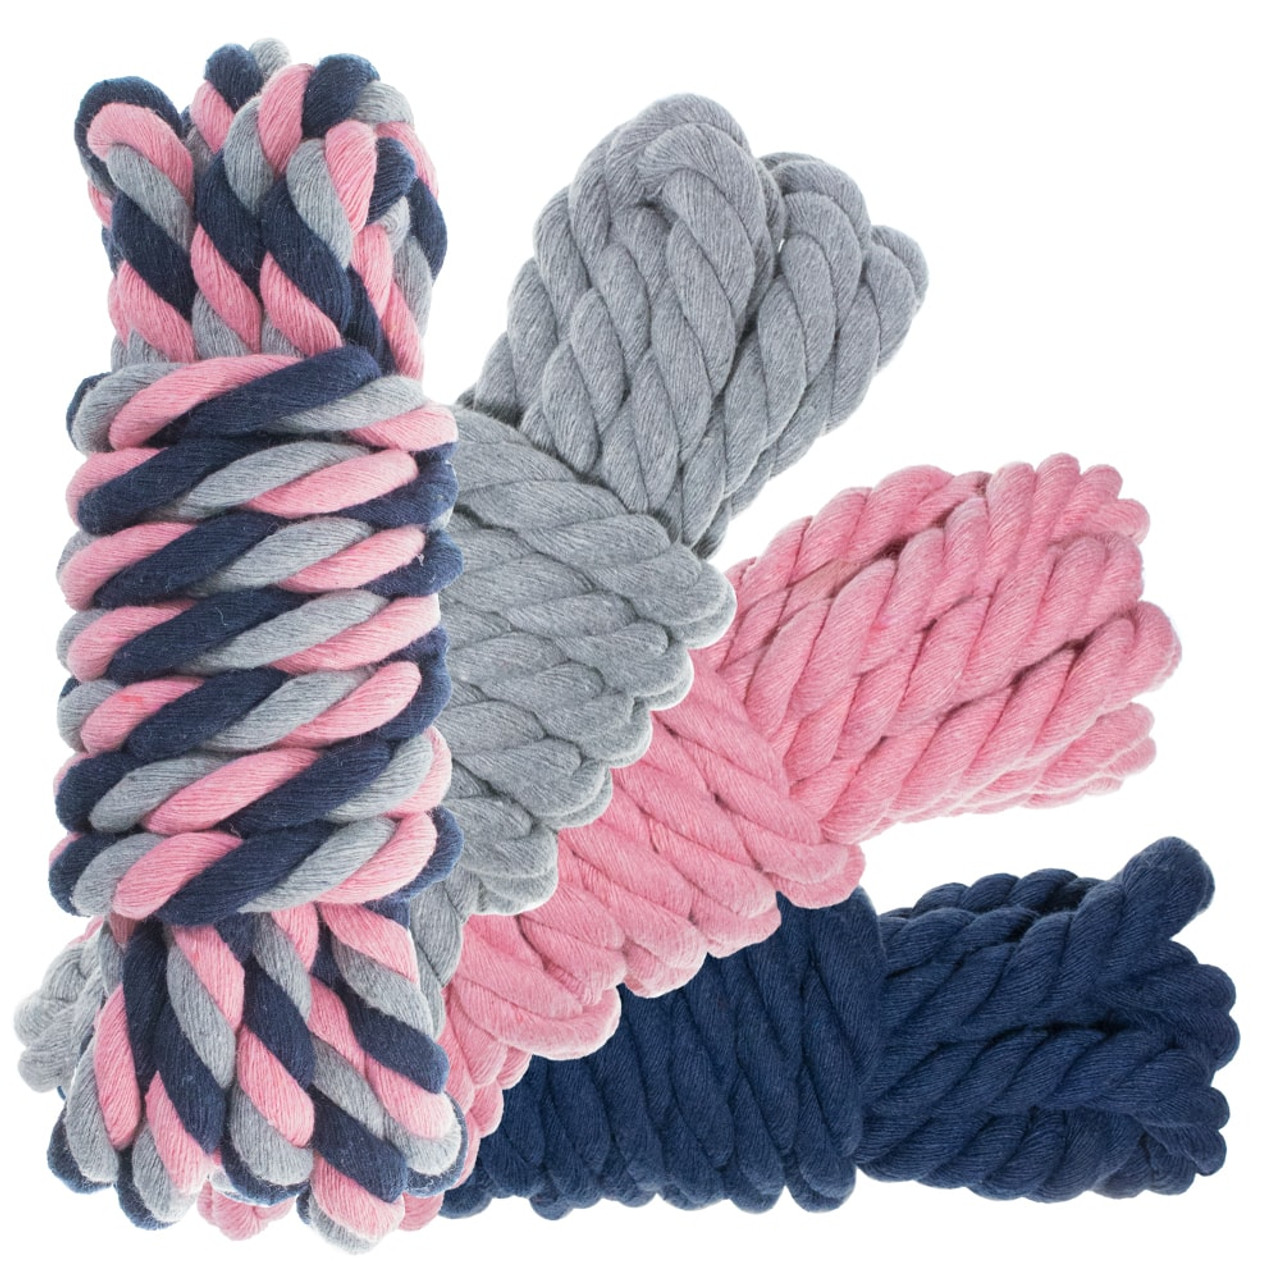 West Coast Paracord Natural Cotton Rope 1/2 inch Twisted Soft Rope by The Foot in 25 Feet, 50 Feet, 100 Feet, and 600 Feet. Pet Safe and USA Made